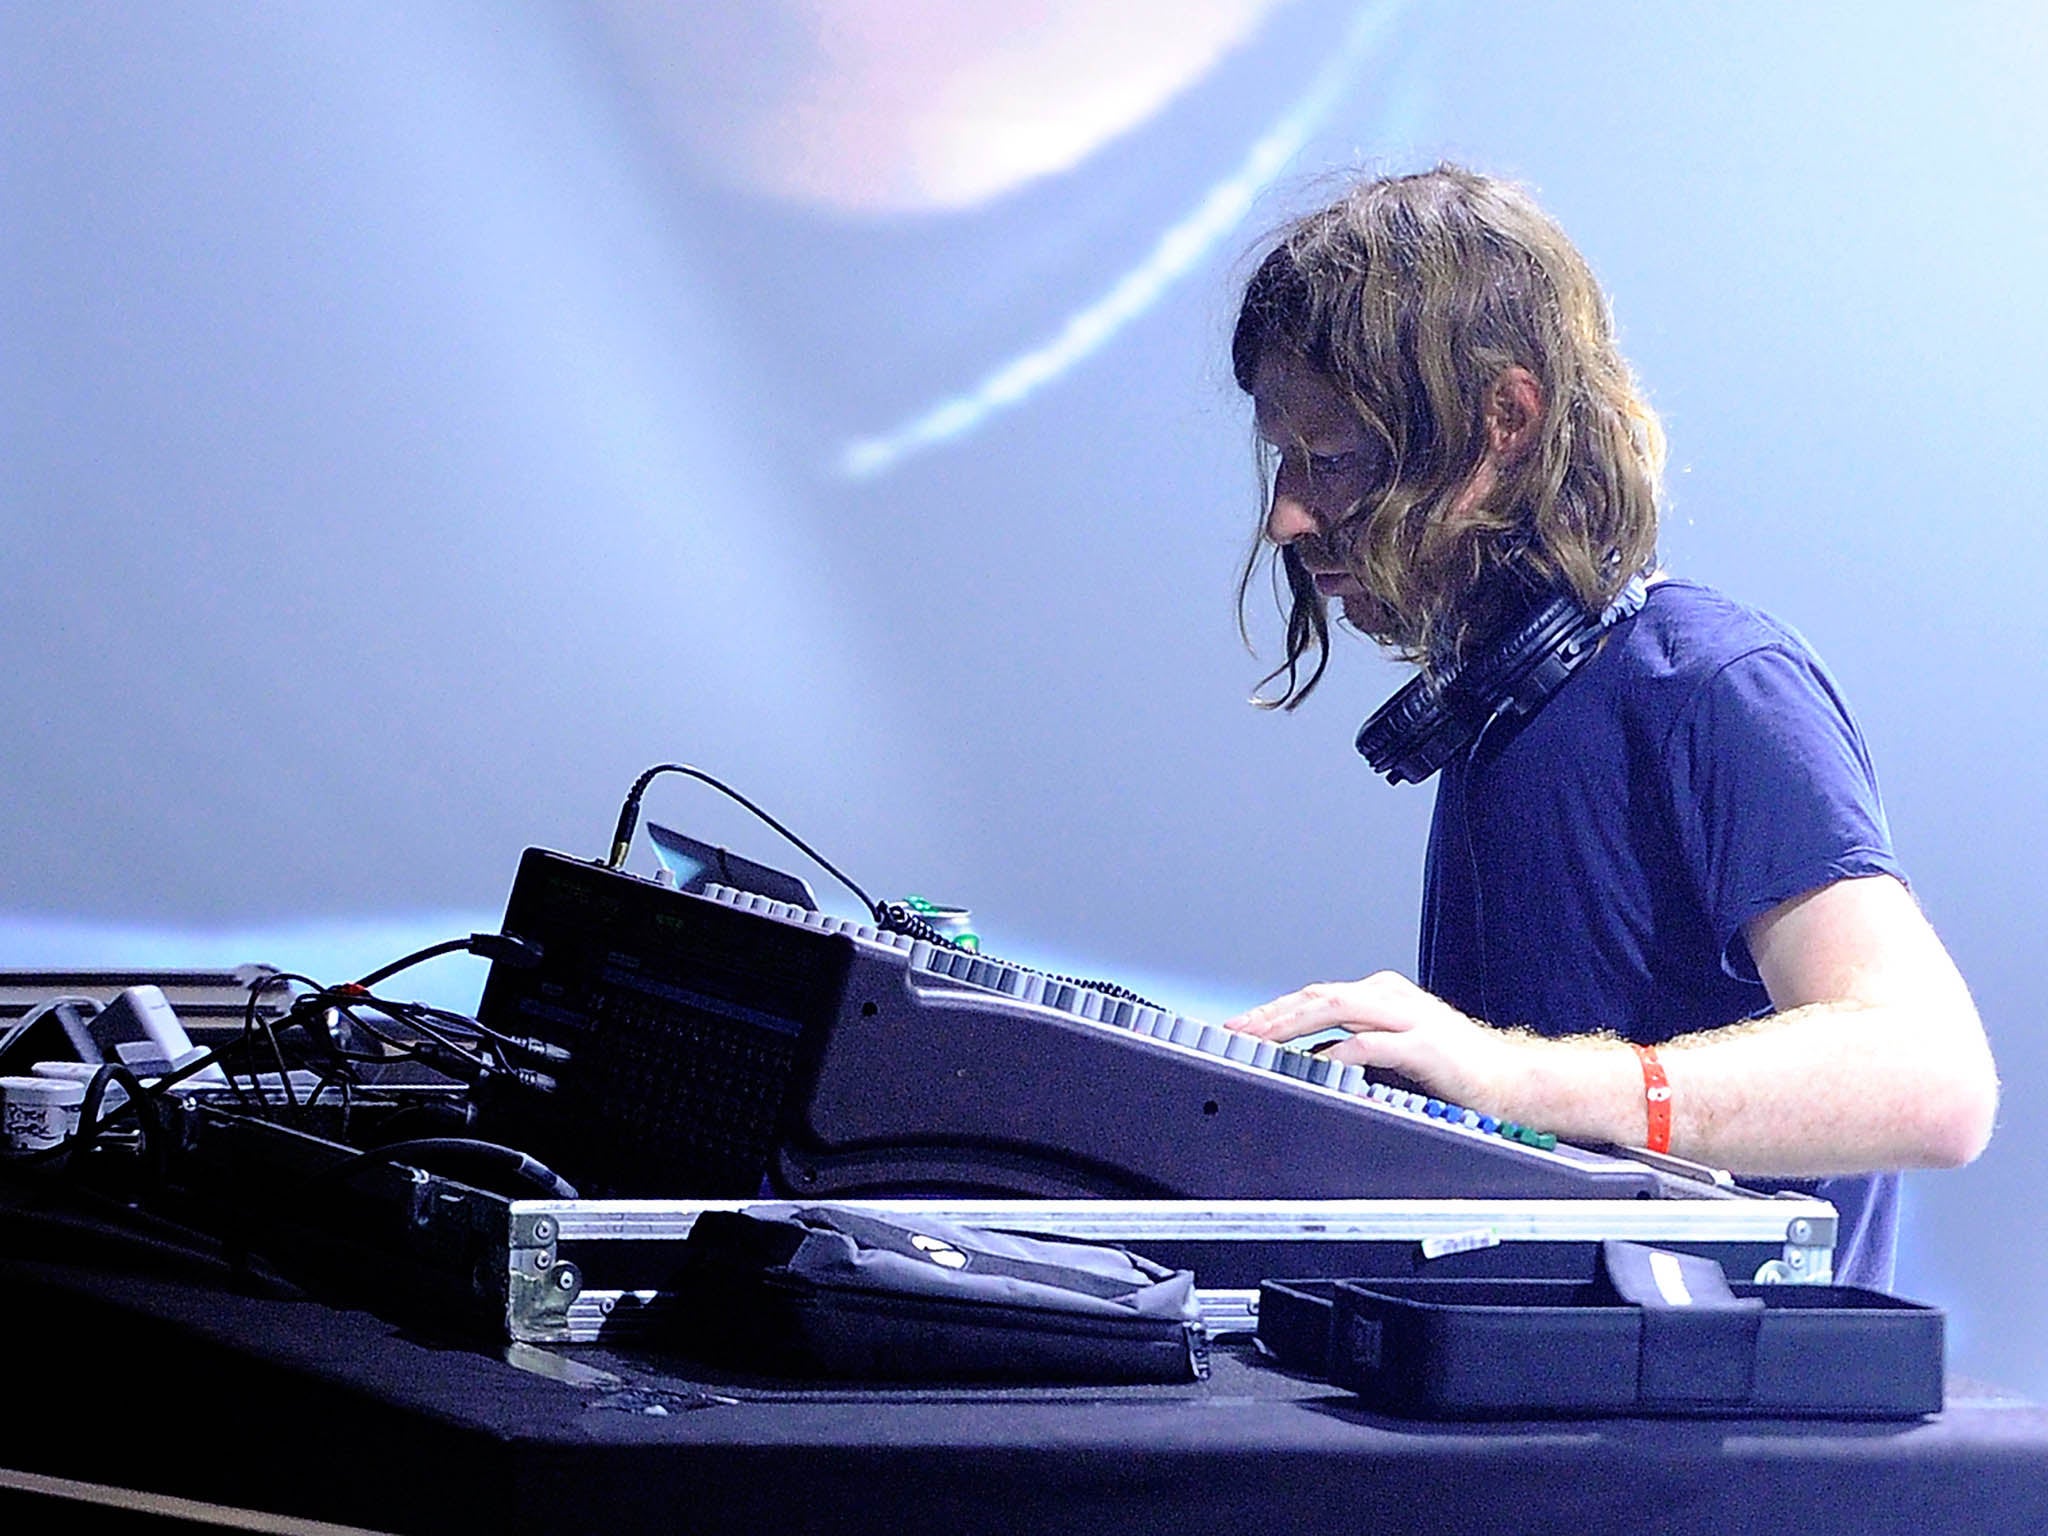 Aphex Twin performs on stage during day one of the Pitchfork Music Festival at the Grande Halle de La Villette (Kristy Sparow/Getty)